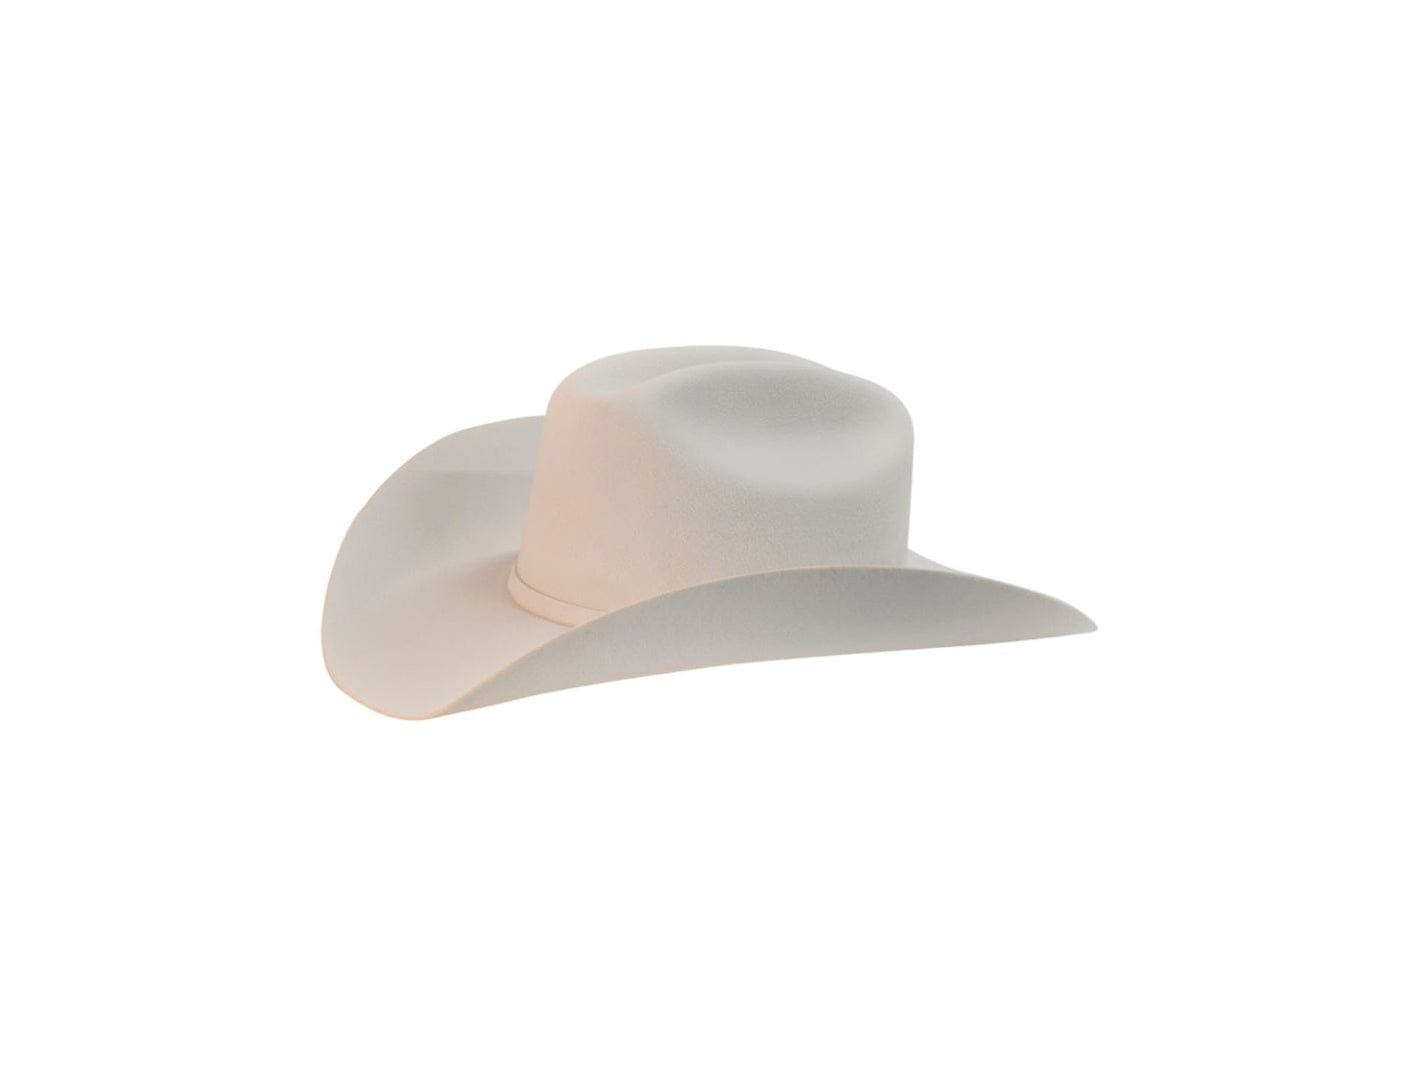 Exclusive "Country" Texas Country Western Felt Cowboy Hat White